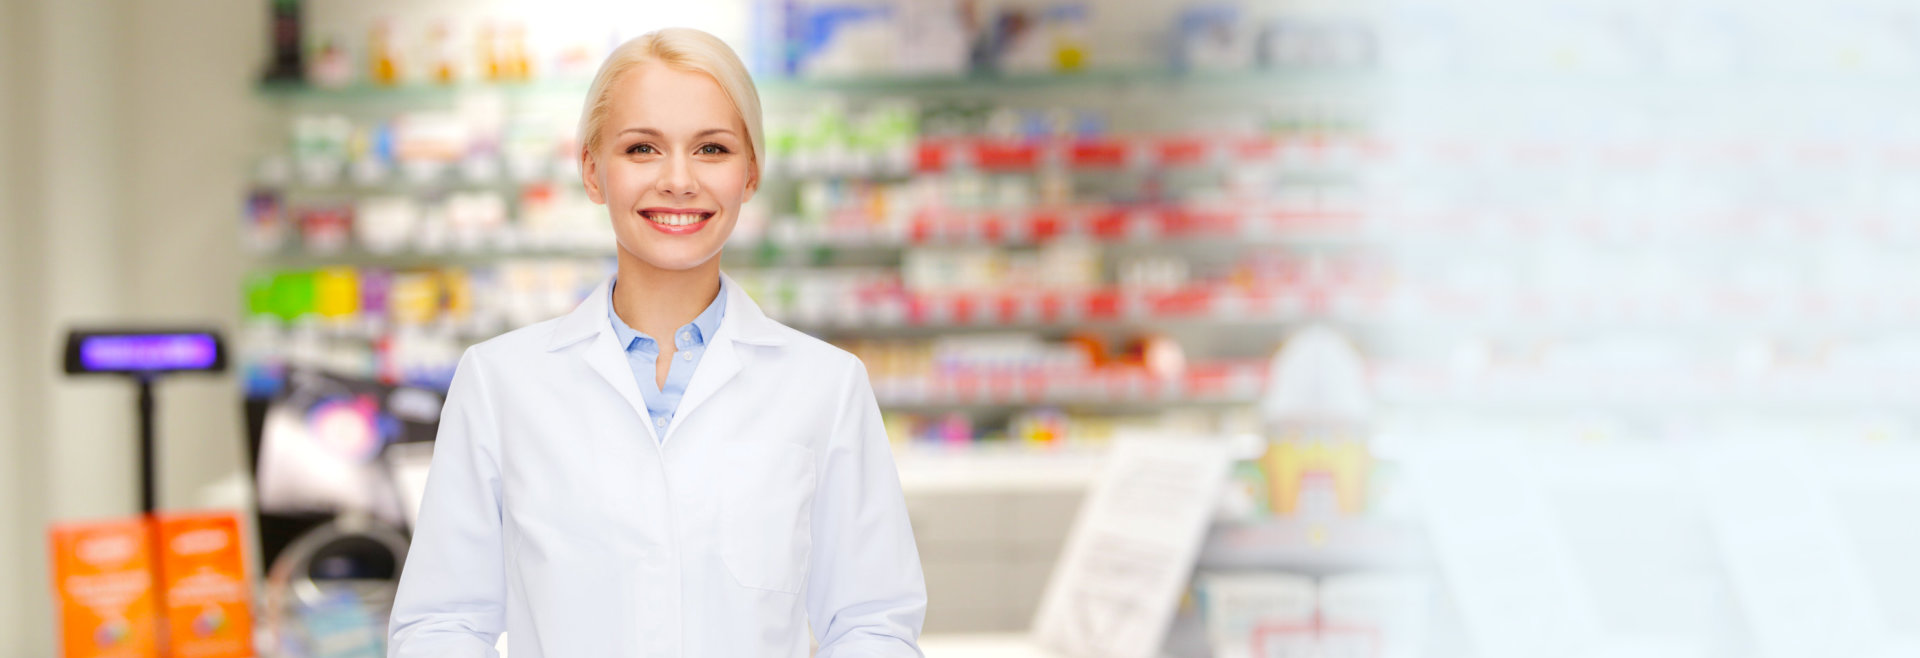 happy young woman pharmacist over drugstore background